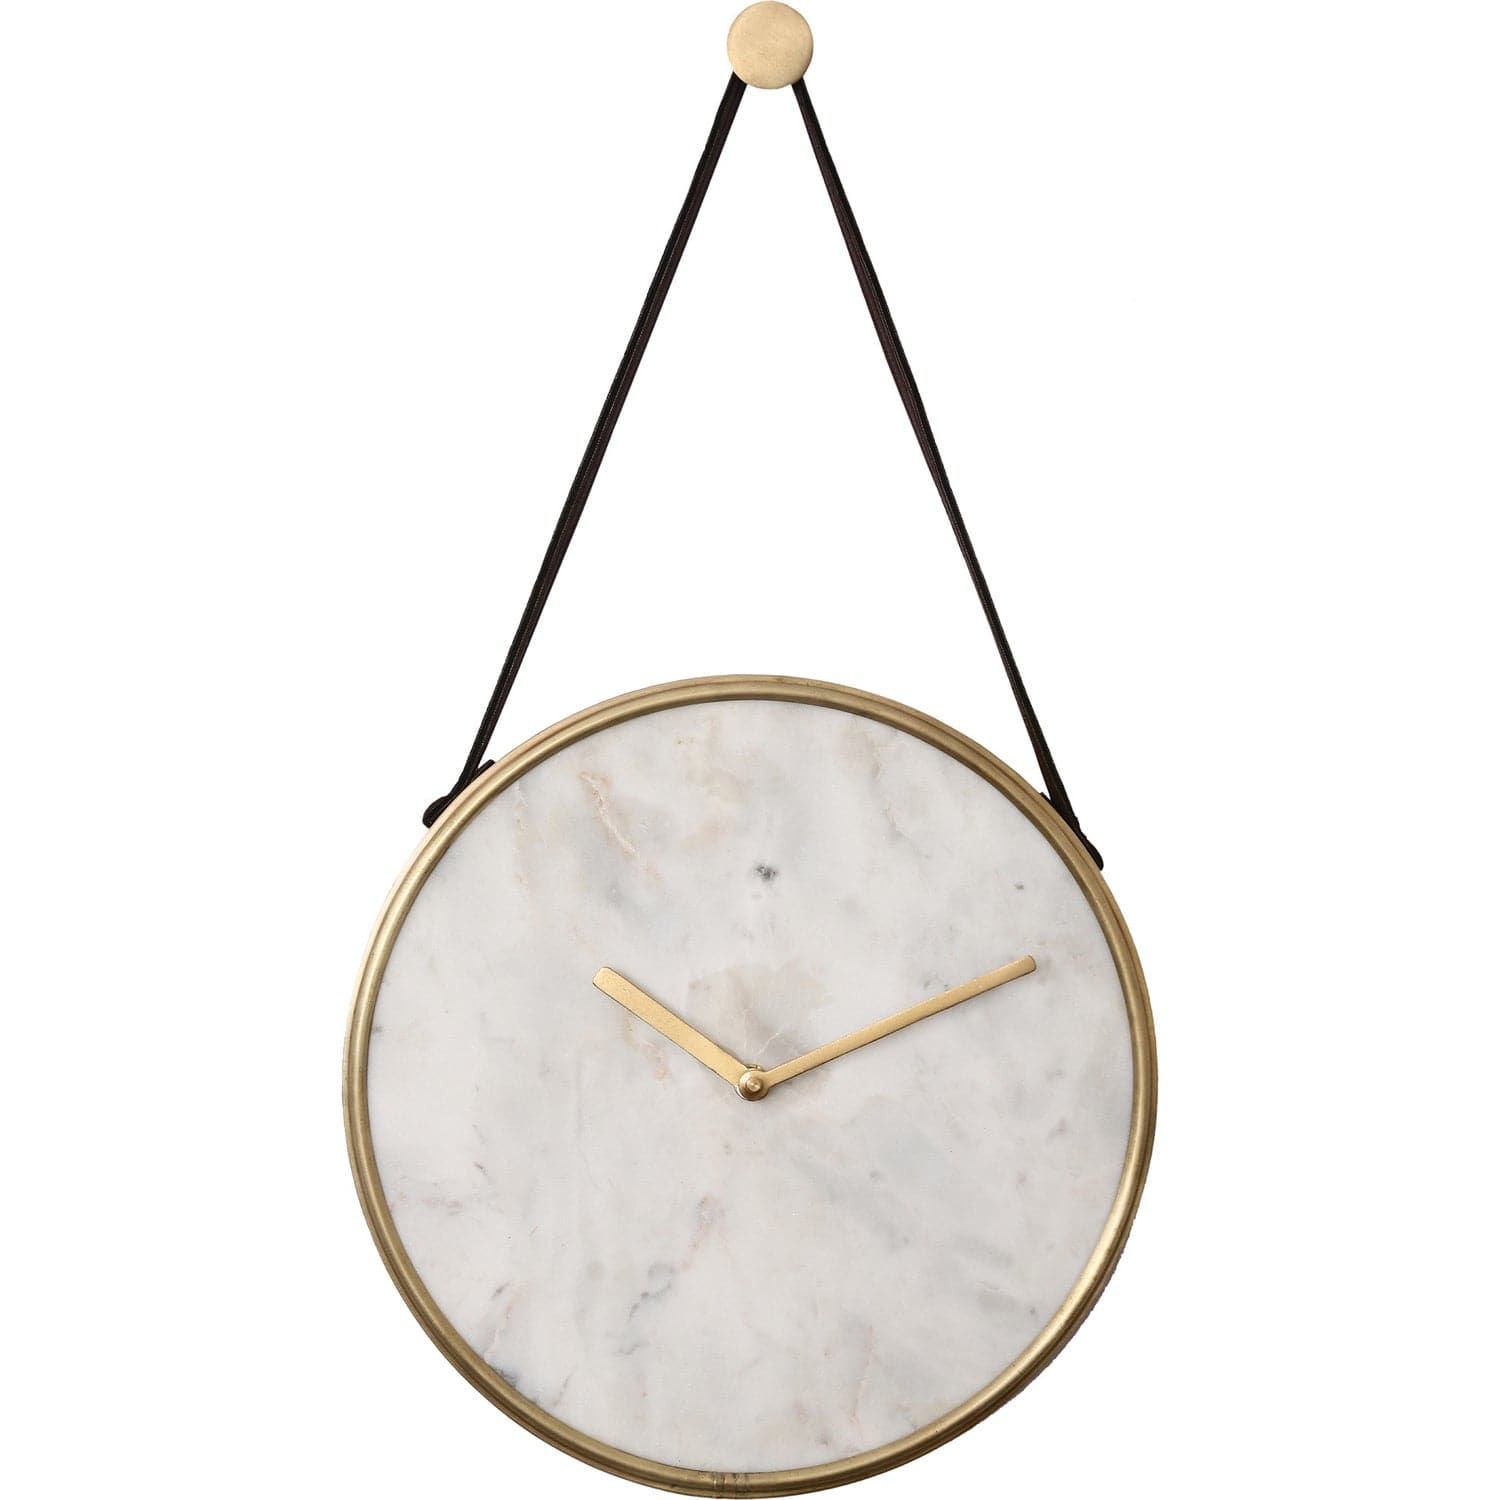 Renwil - CL239 - Home Accents - Clocks